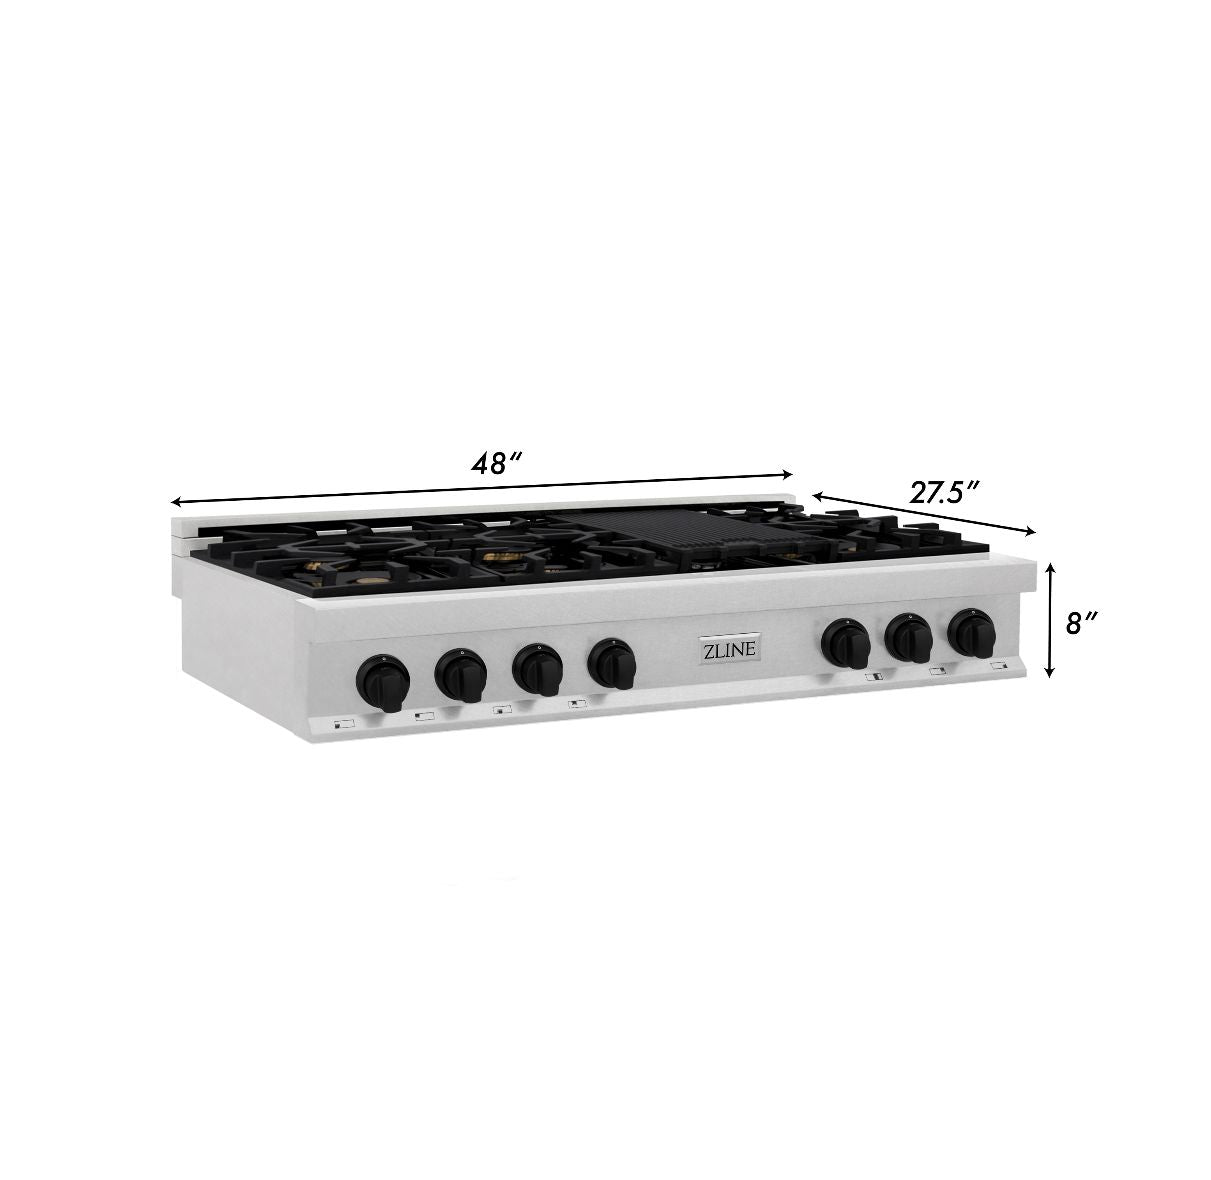 ZLINE Autograph Edition 48 in. Porcelain Rangetop with 7 Gas Burners in DuraSnow Stainless Steel and Matte Black Accents (RTSZ-48-MB) dimensional diagram with measurements.